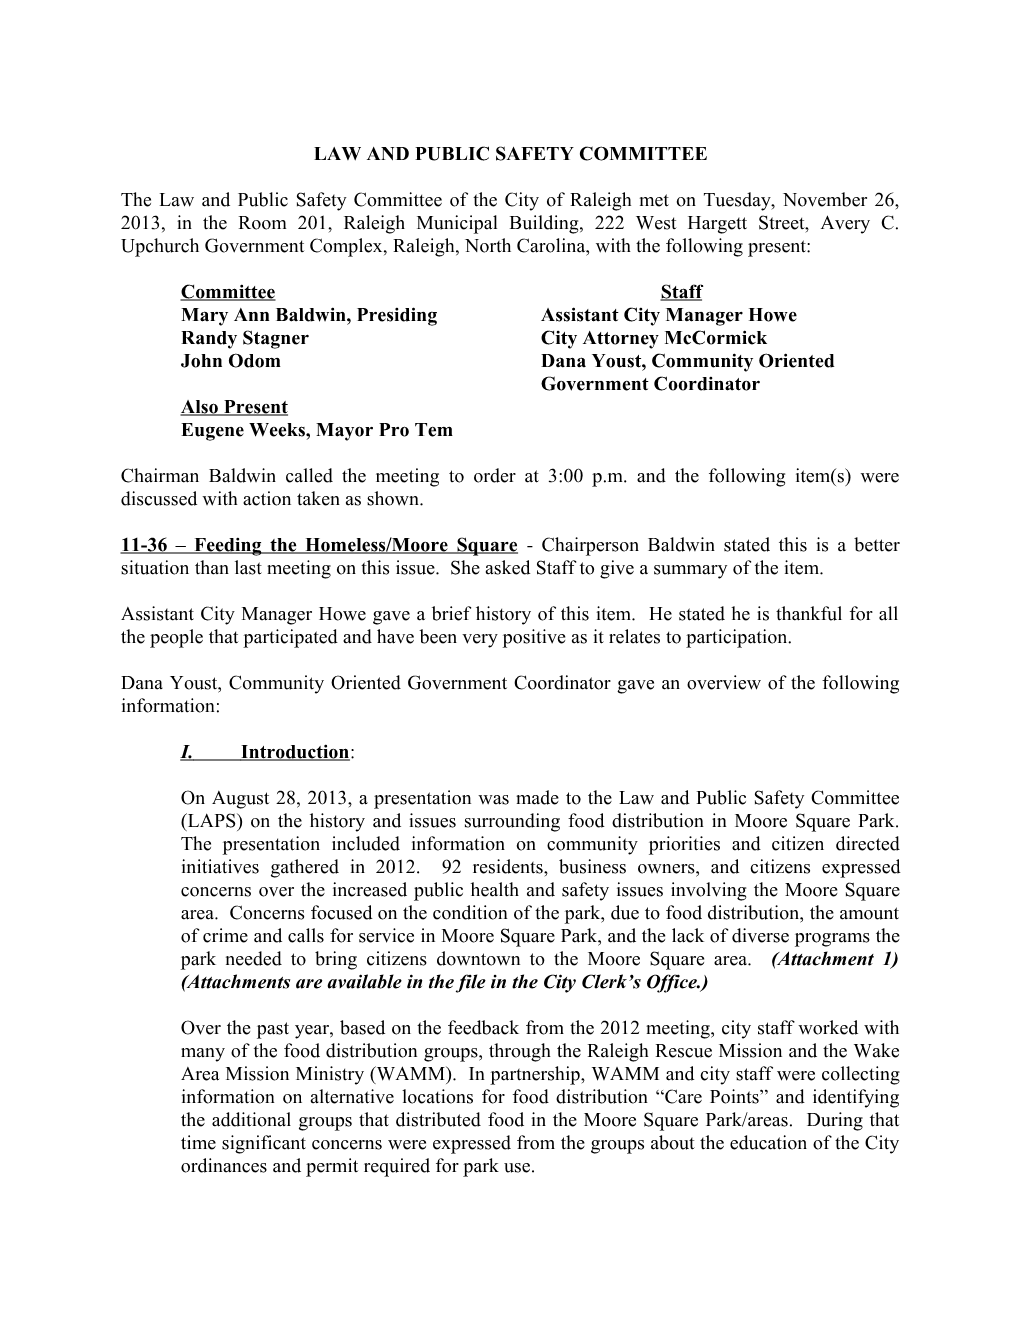 Law and Public Safety Committee Minutes - 11/26/2013